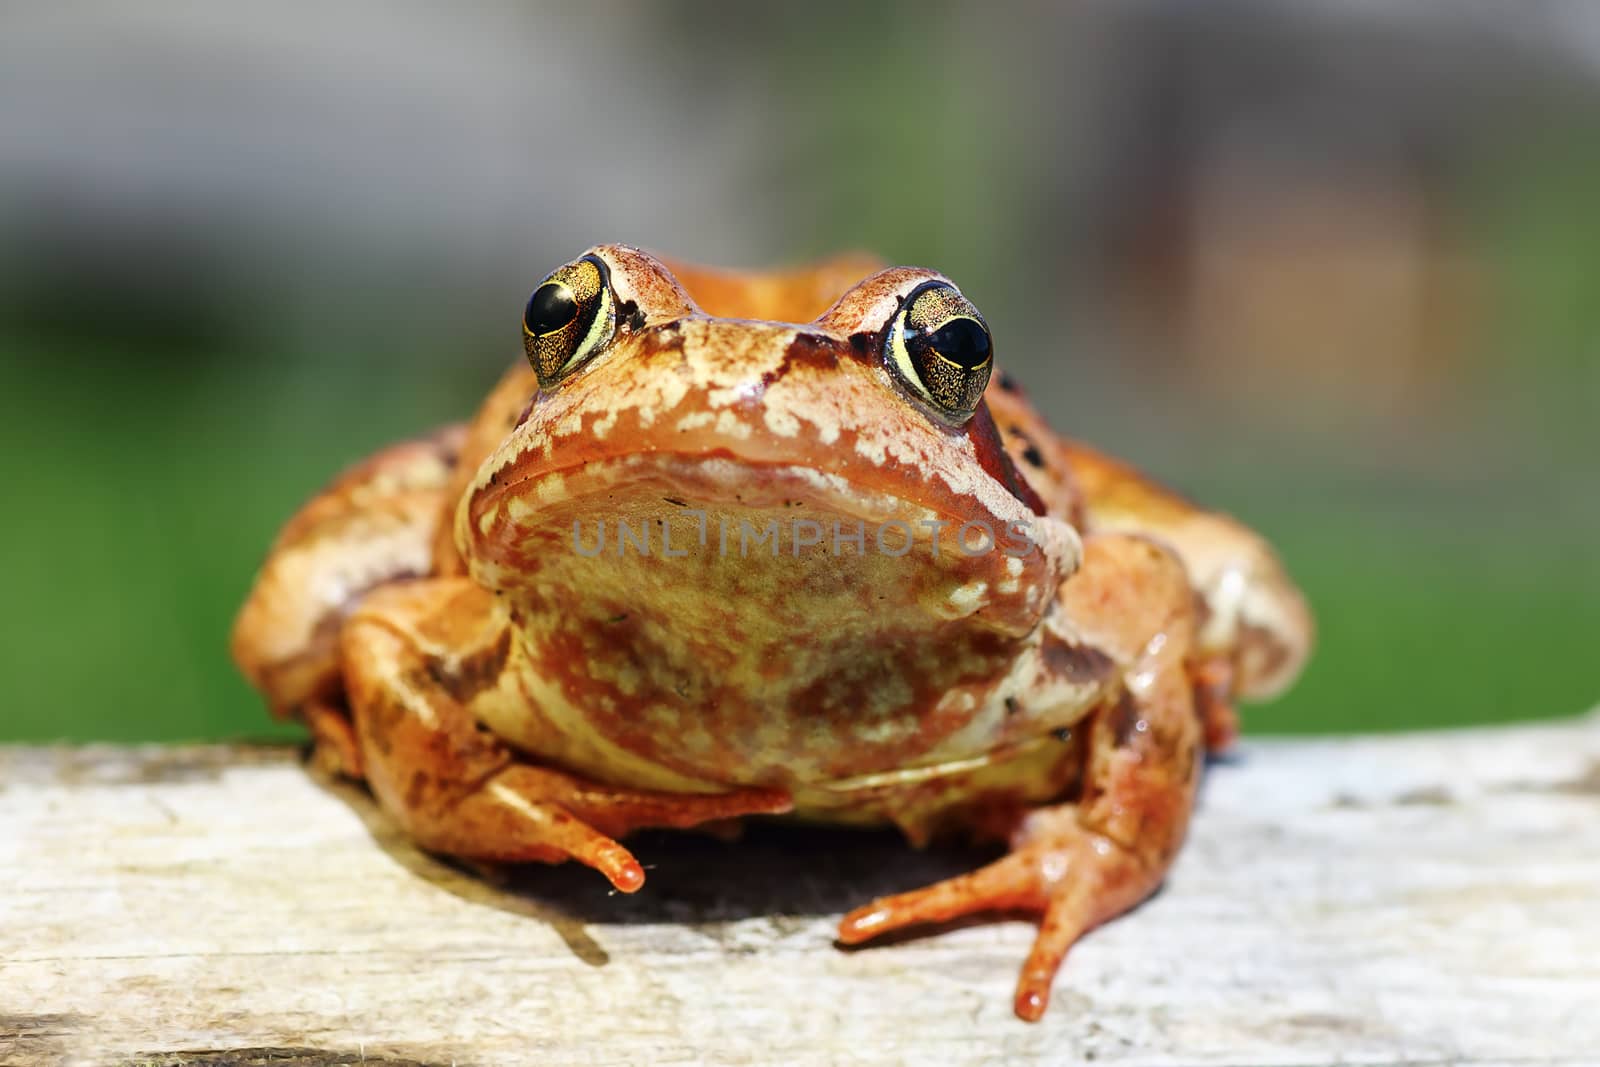 cute portrait of Rana temporaria, the european common brown frog, animal looking at the camera